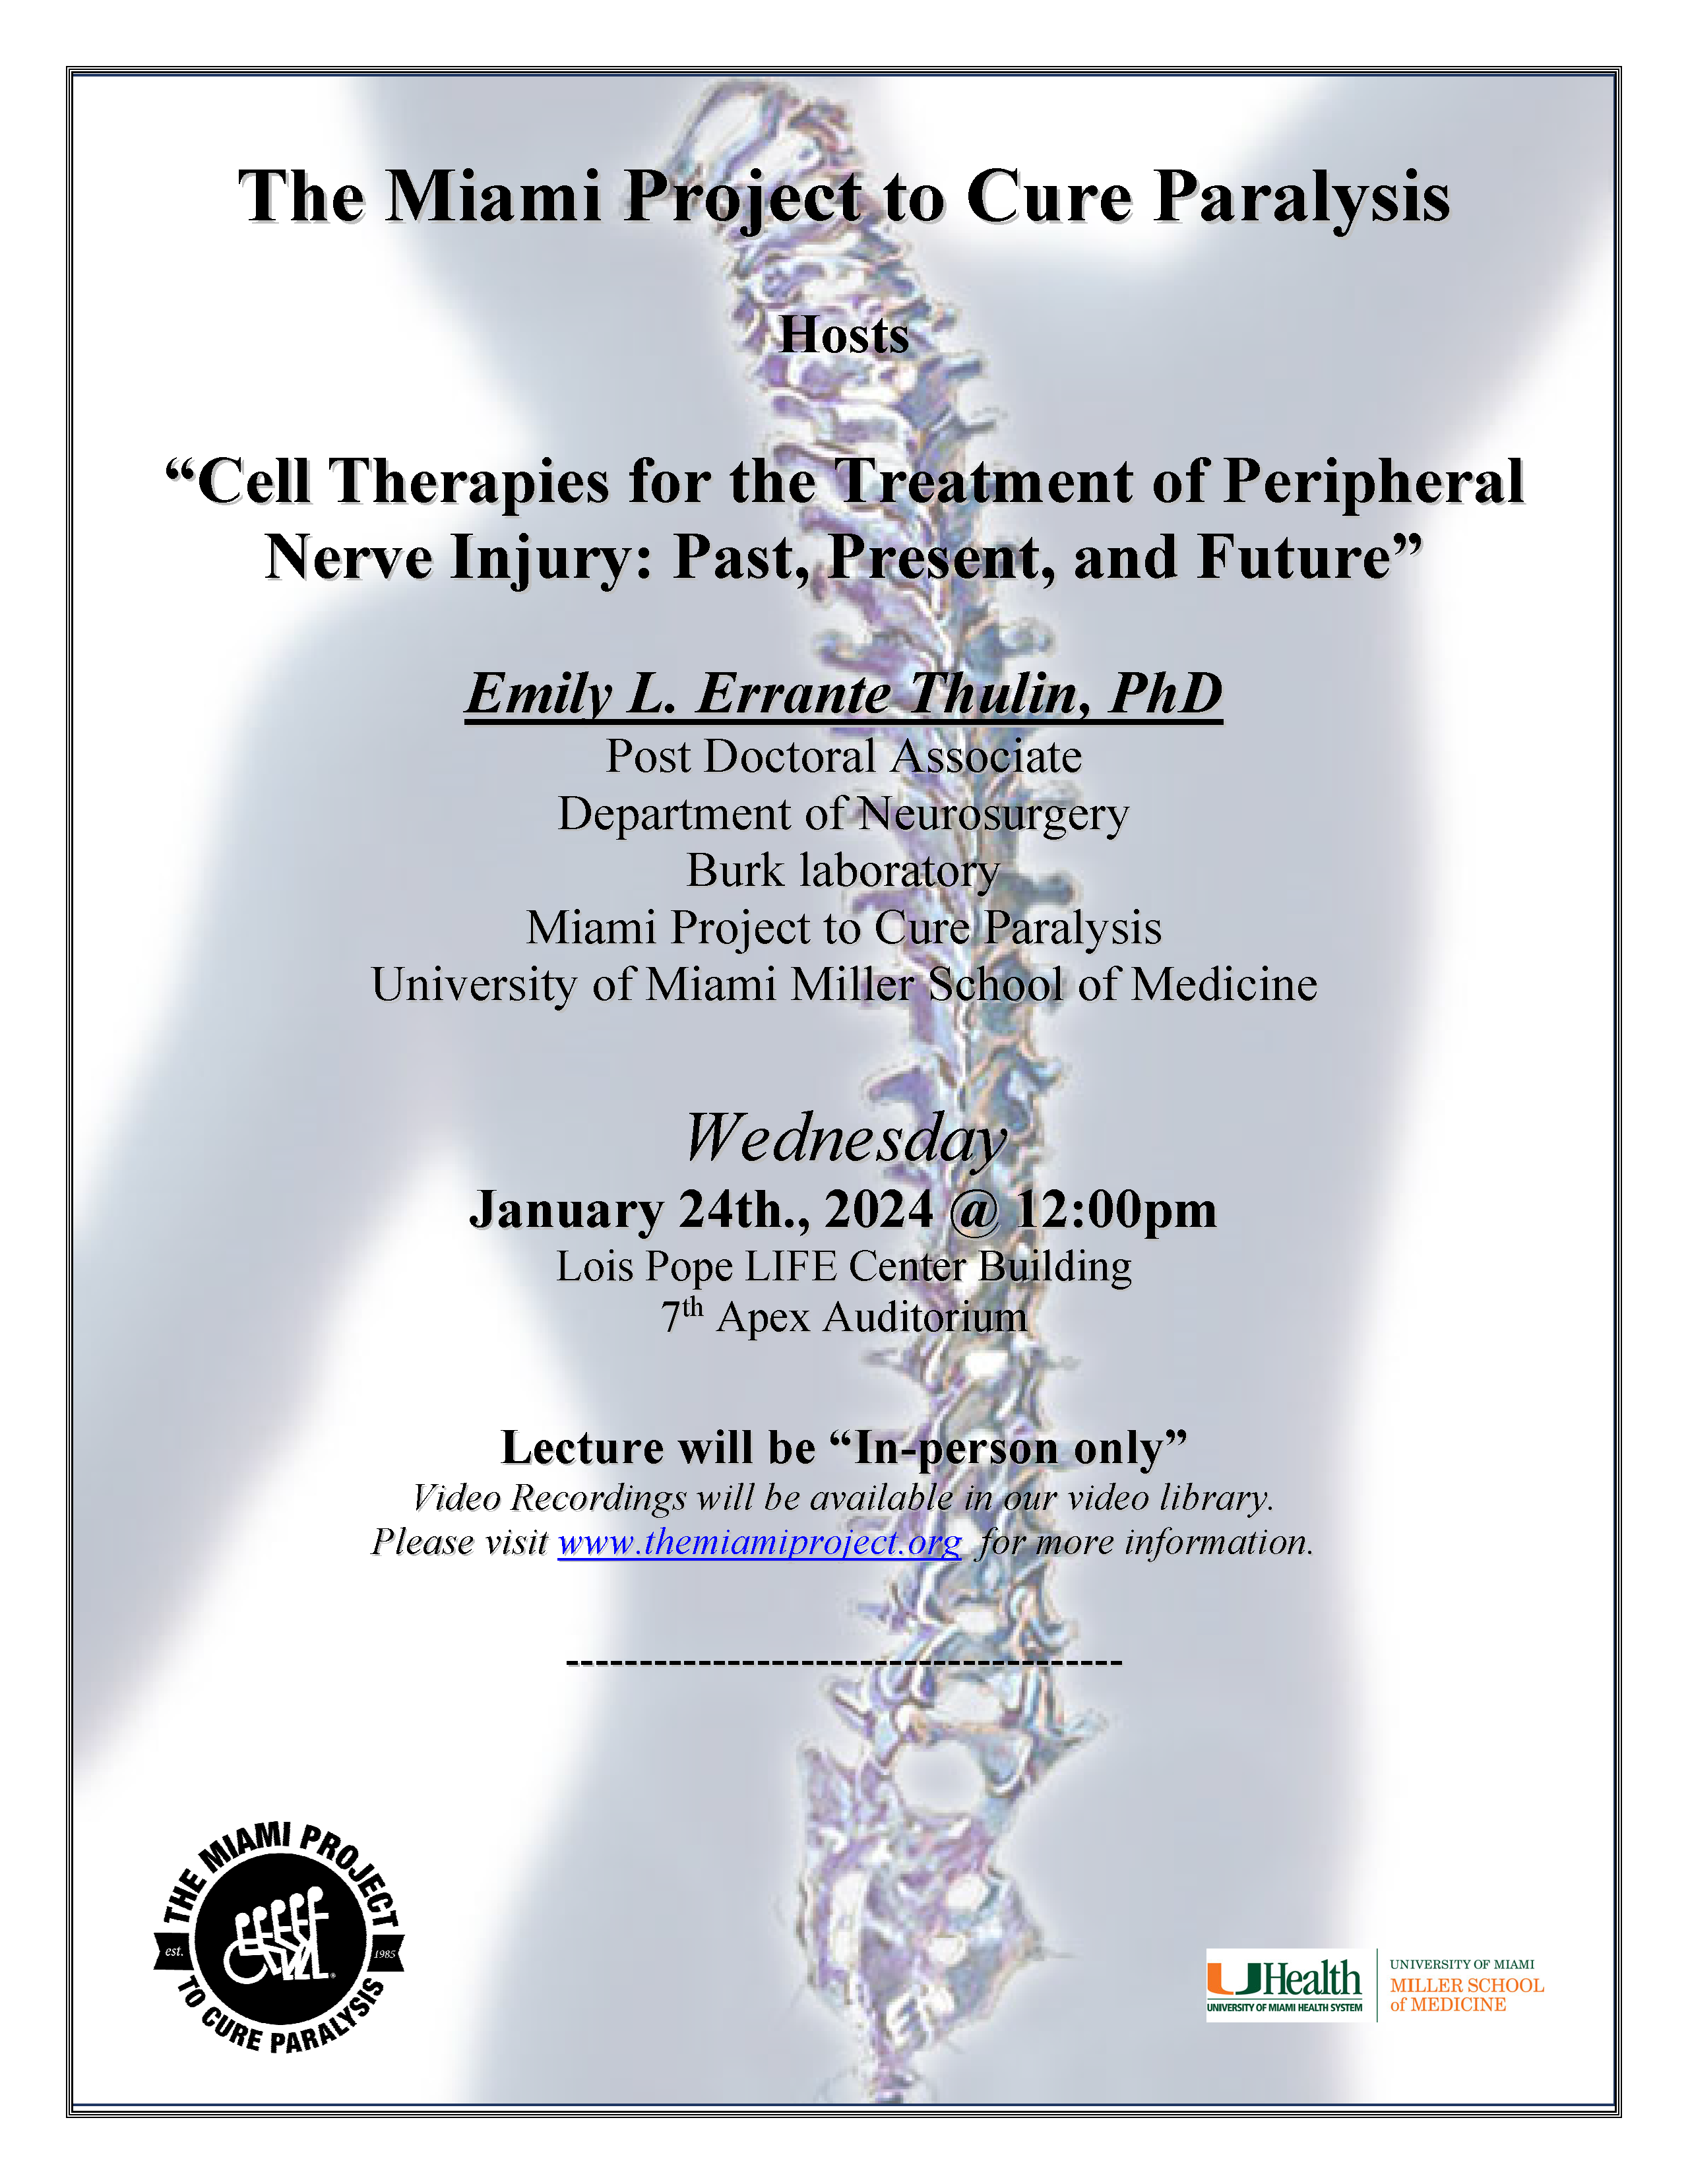 Cell Therapies for the Treatment of PeripheralNerve Injury: Past, Present, and Future